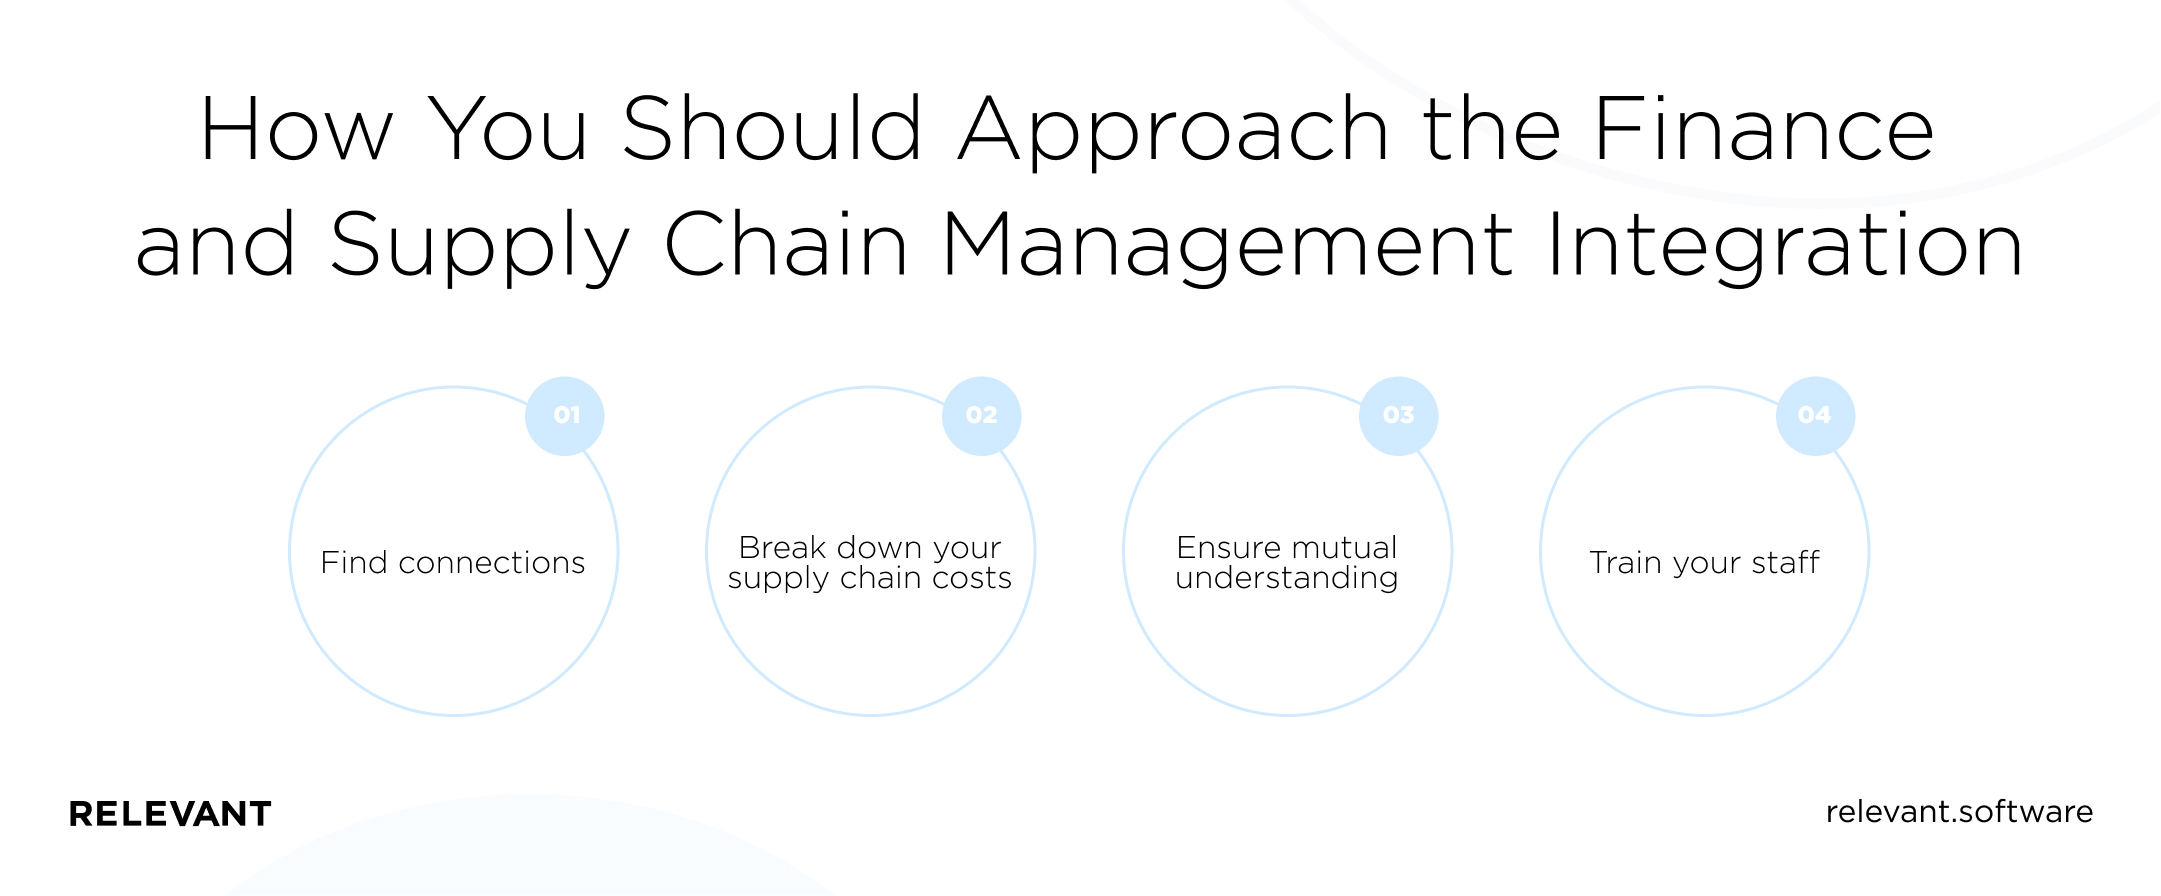 How You Should Approach the Finance and Supply Chain Management Integration